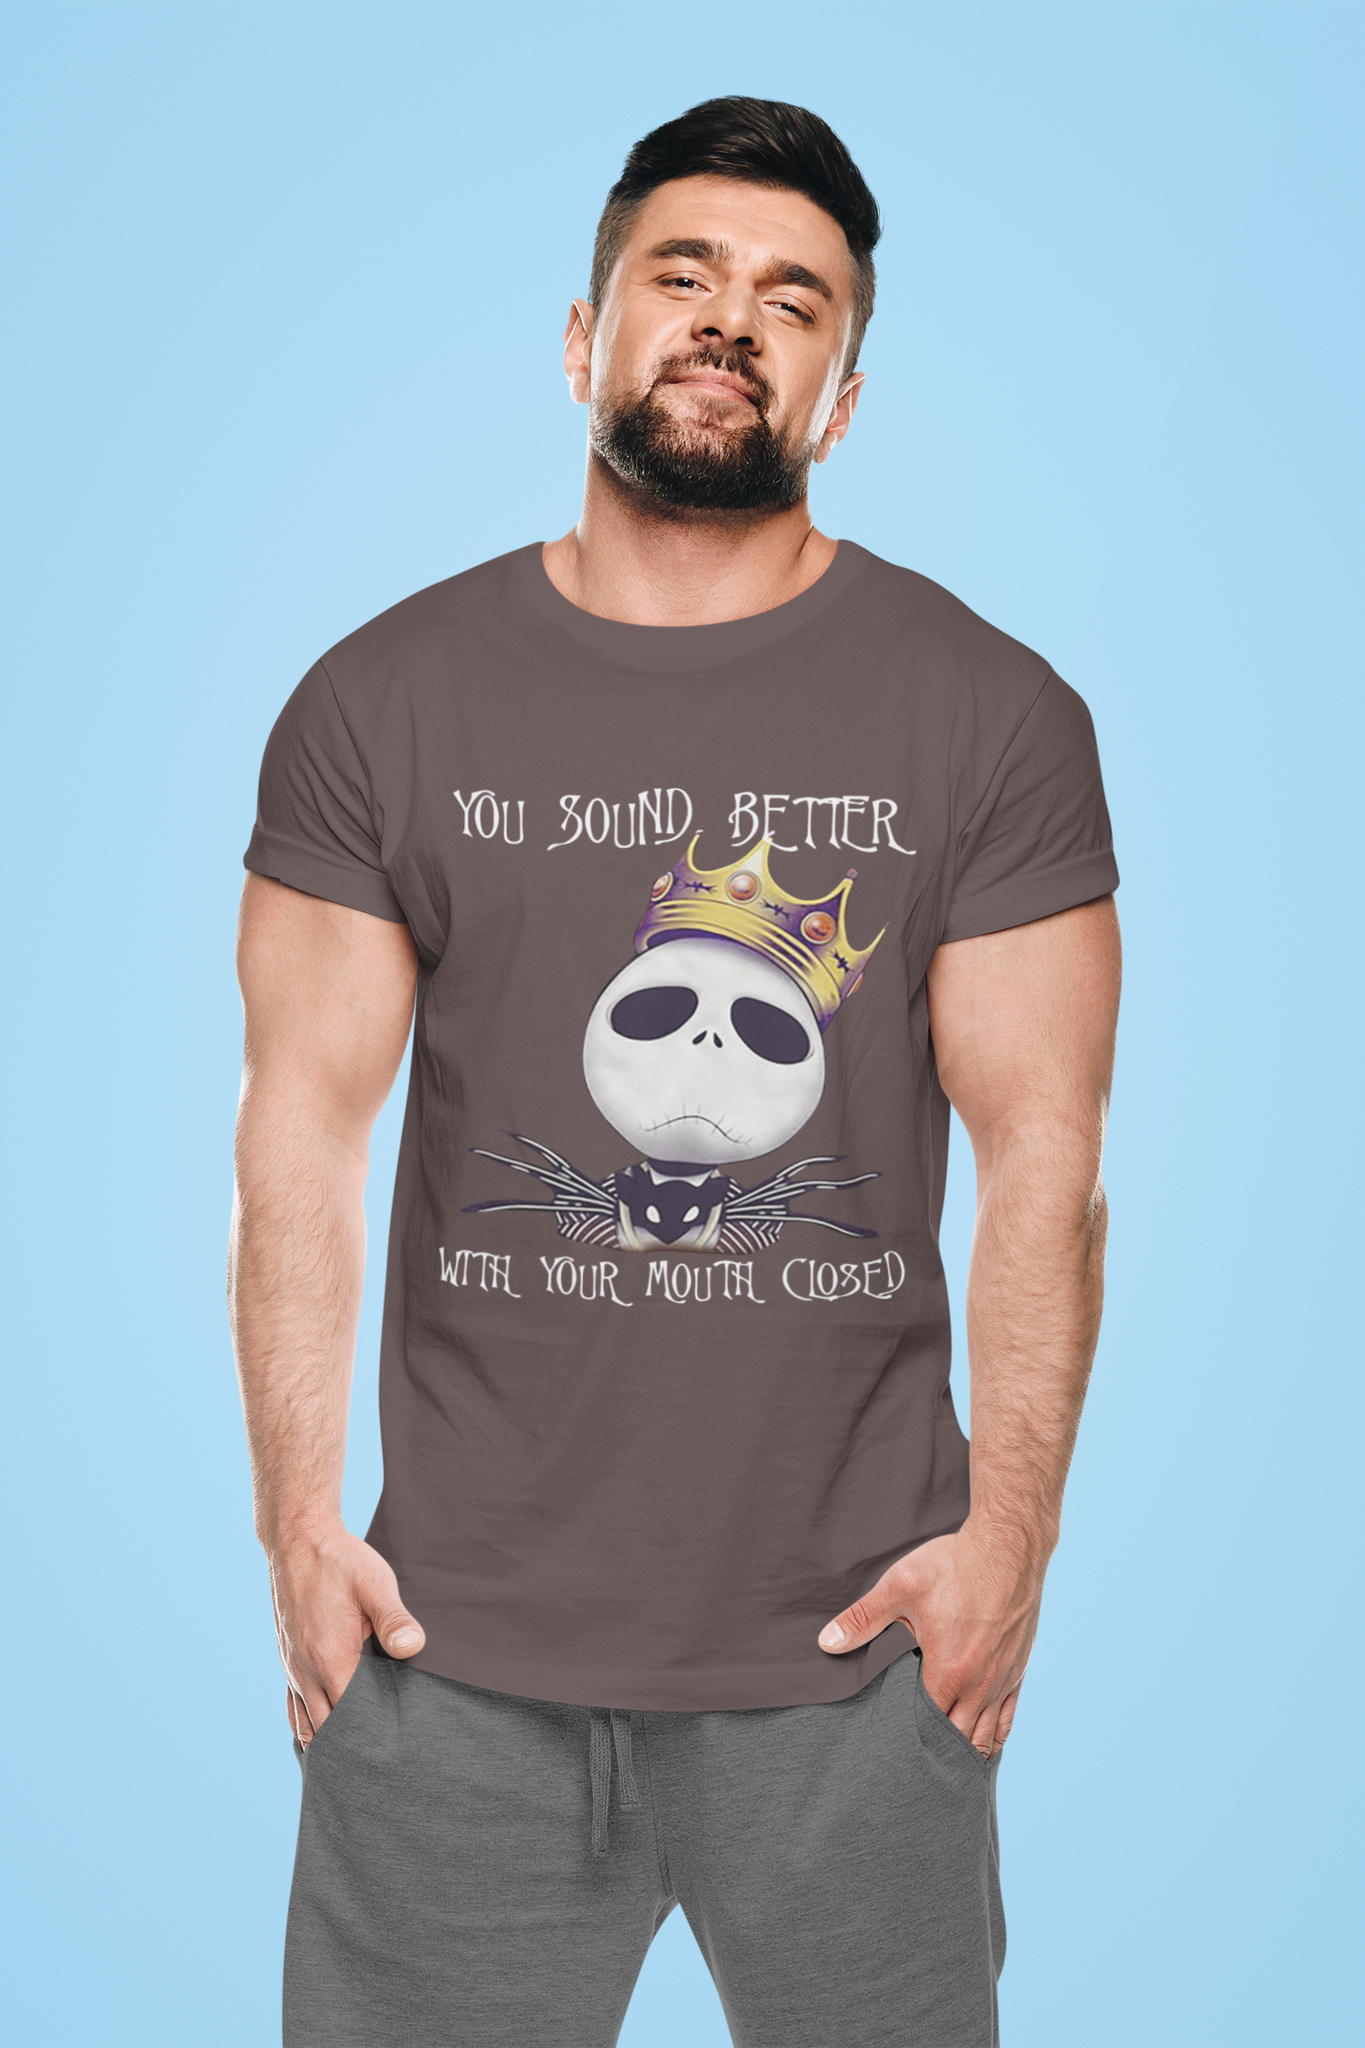 Nightmare Before Christmas T Shirt, You Sound Better With Your Mouth Closed Tshirt, Jack Skellington T Shirt, Halloween Gifts